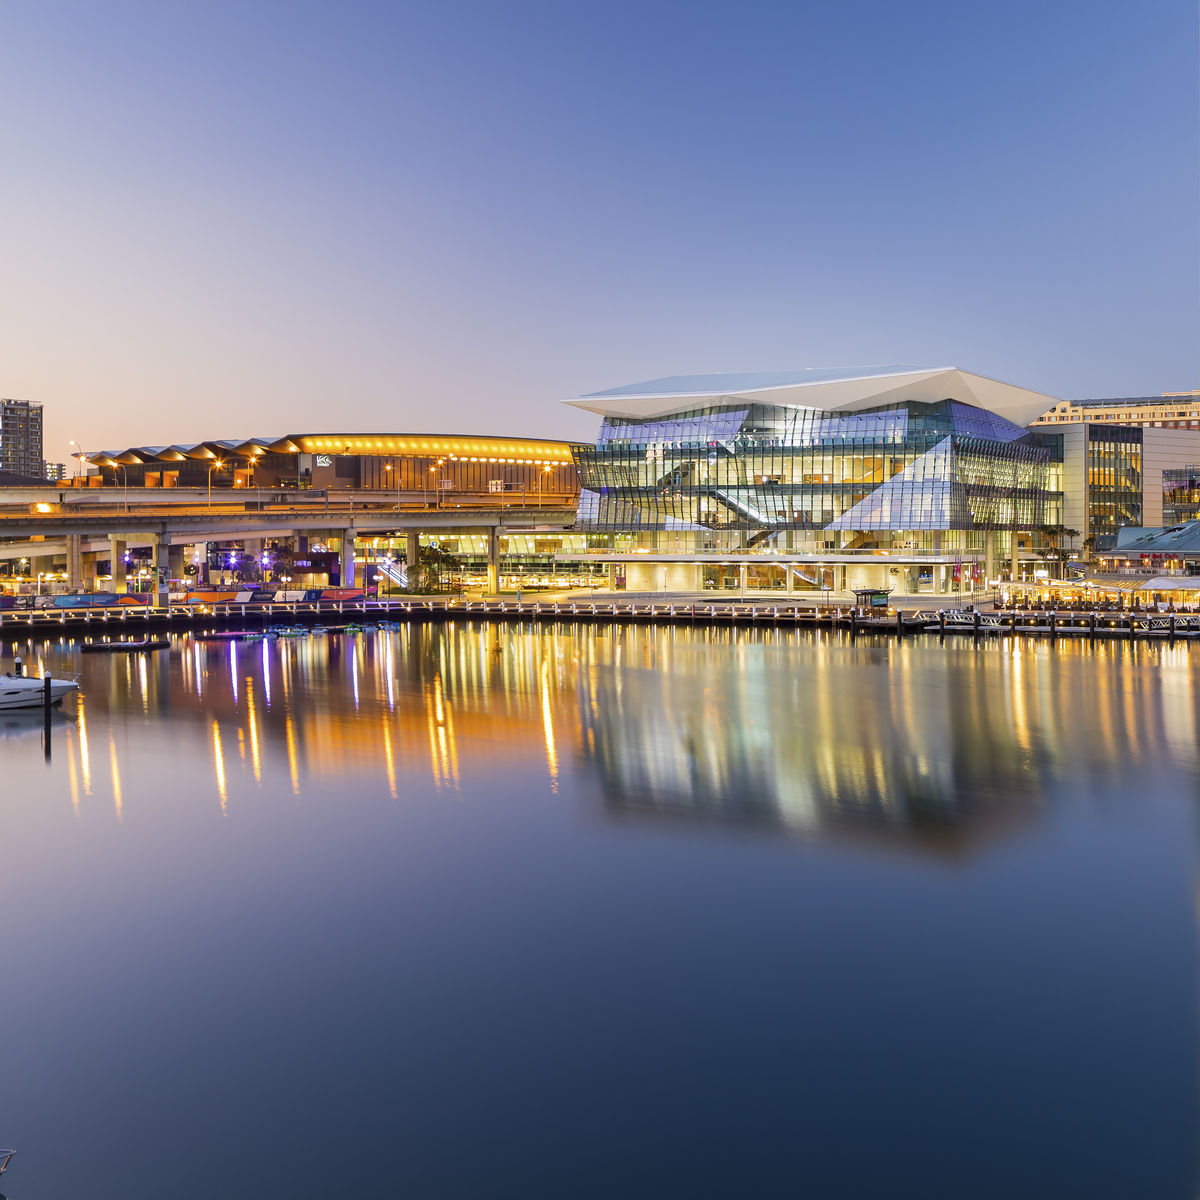 Exterior Image of International Convention Center Sydney during the day on the water